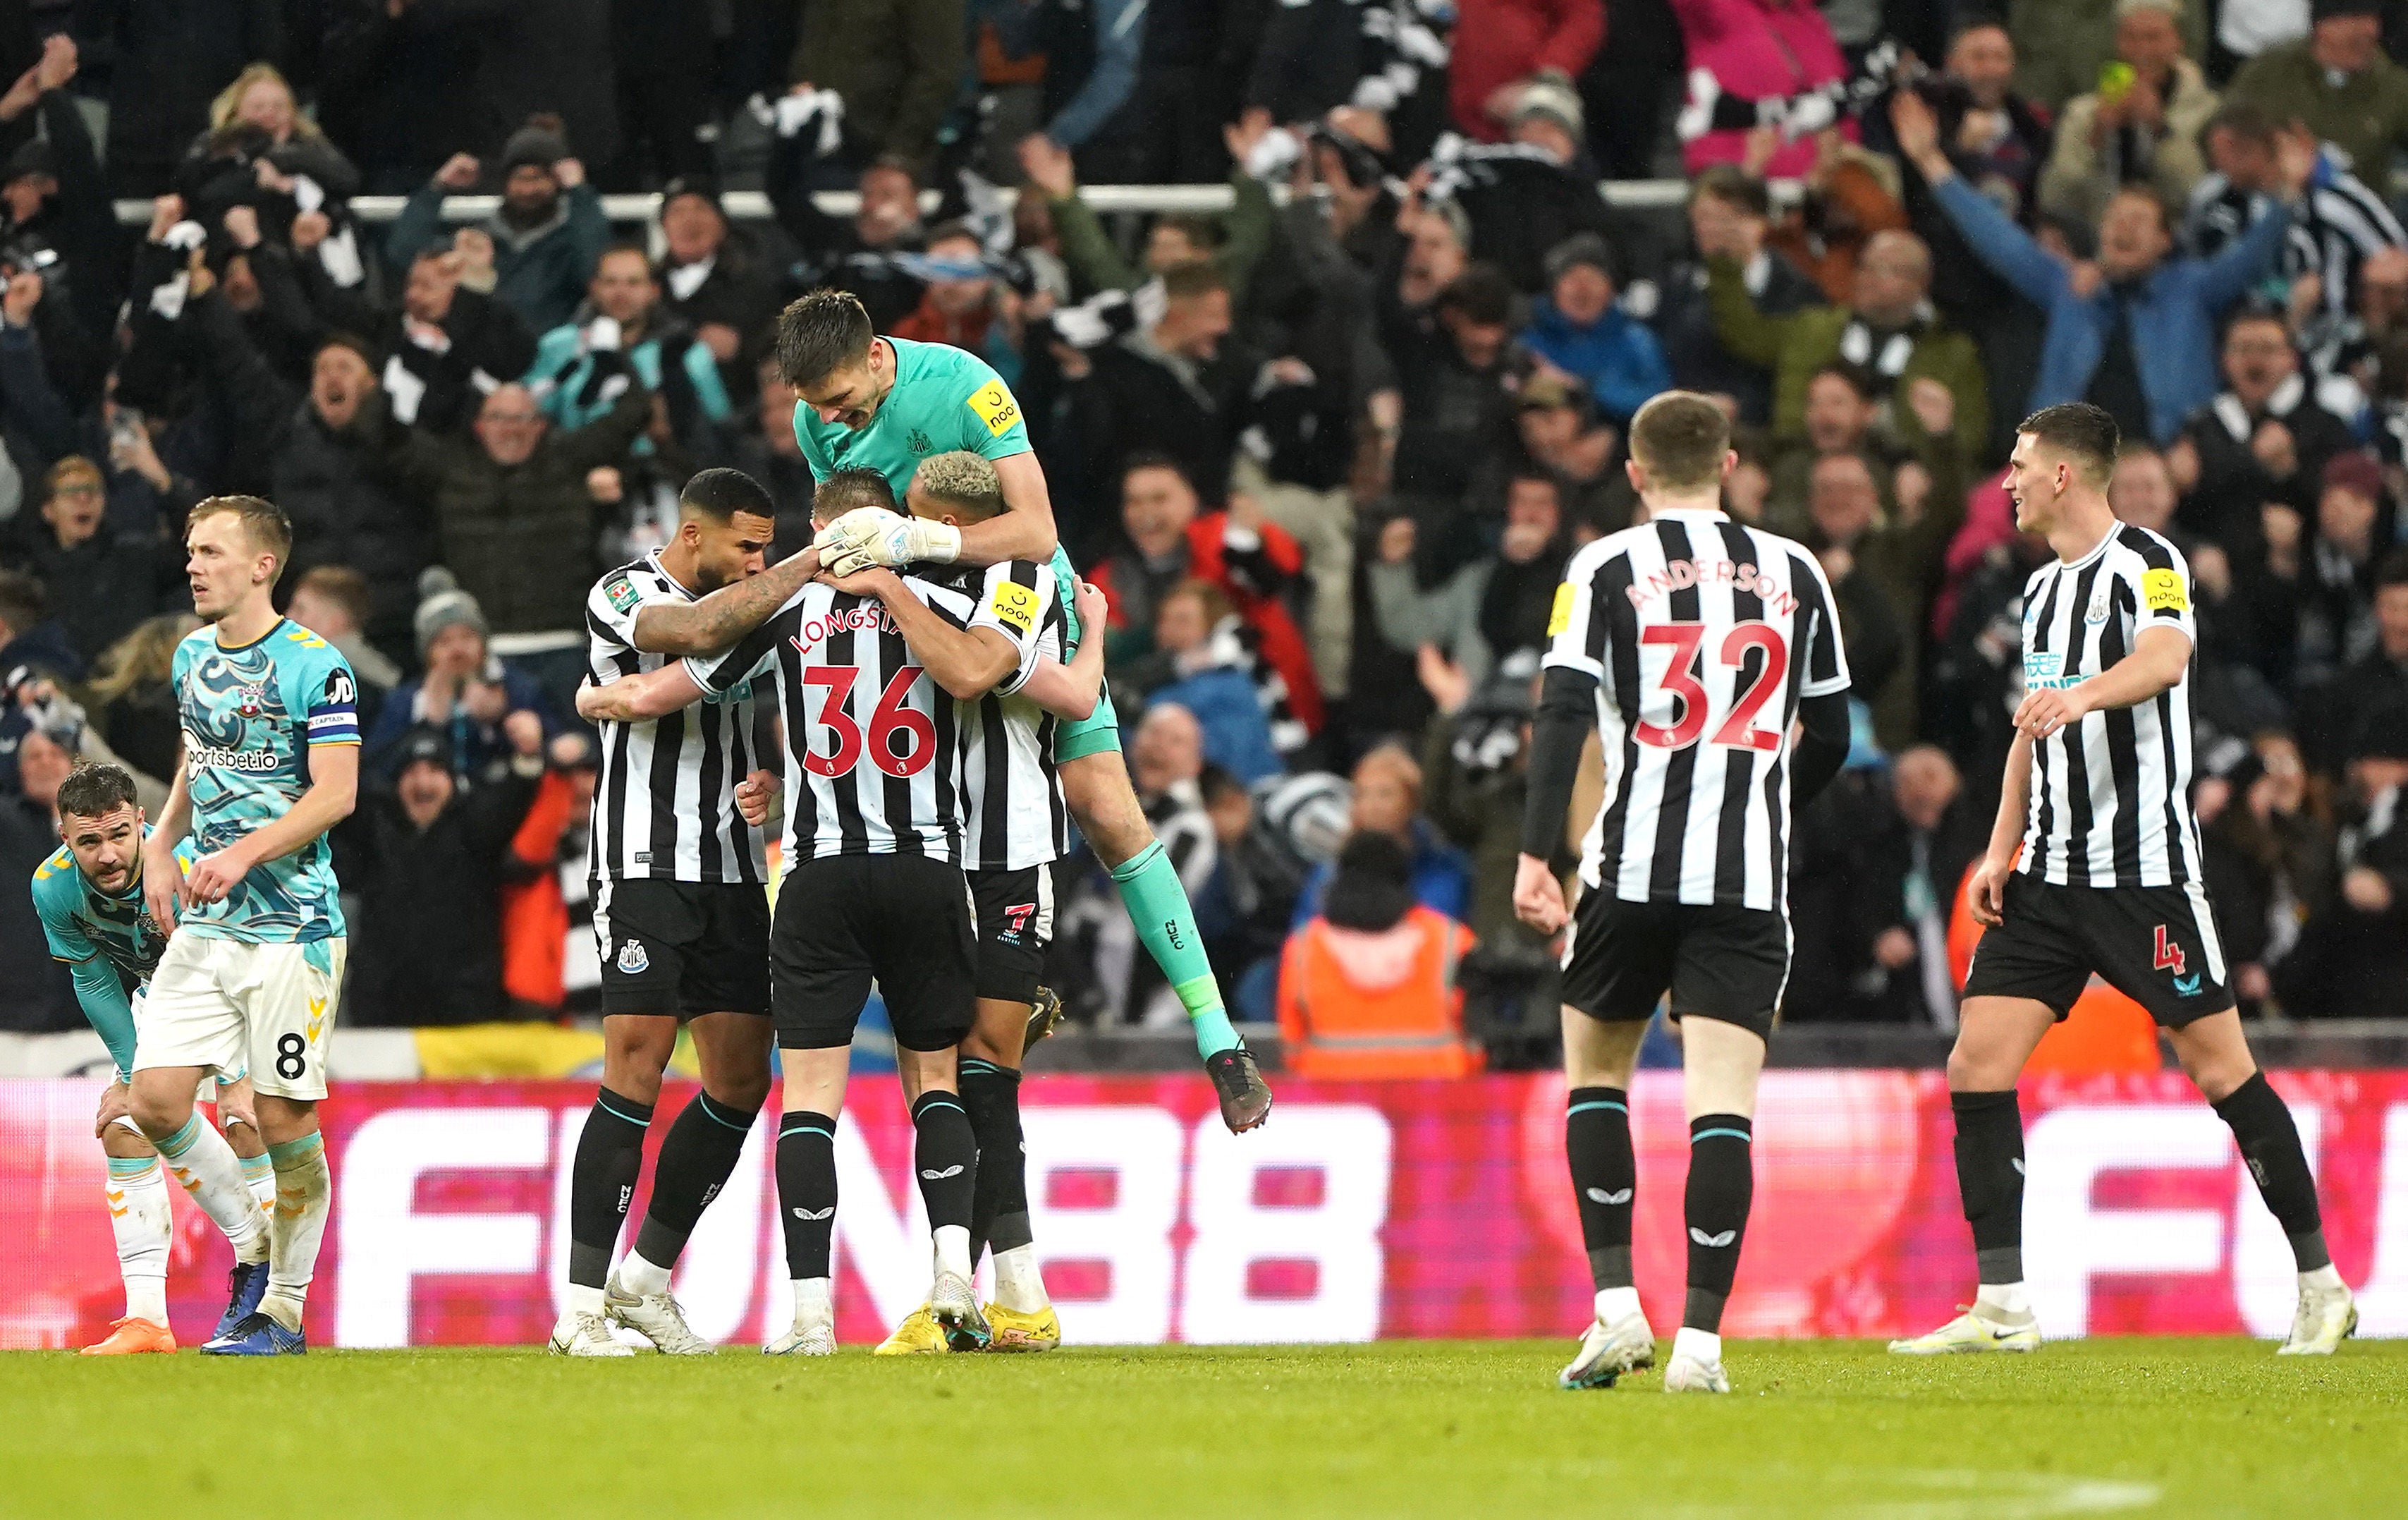 Newcastle could celebrate reaching a domestic cup final for the first time in the 21st century